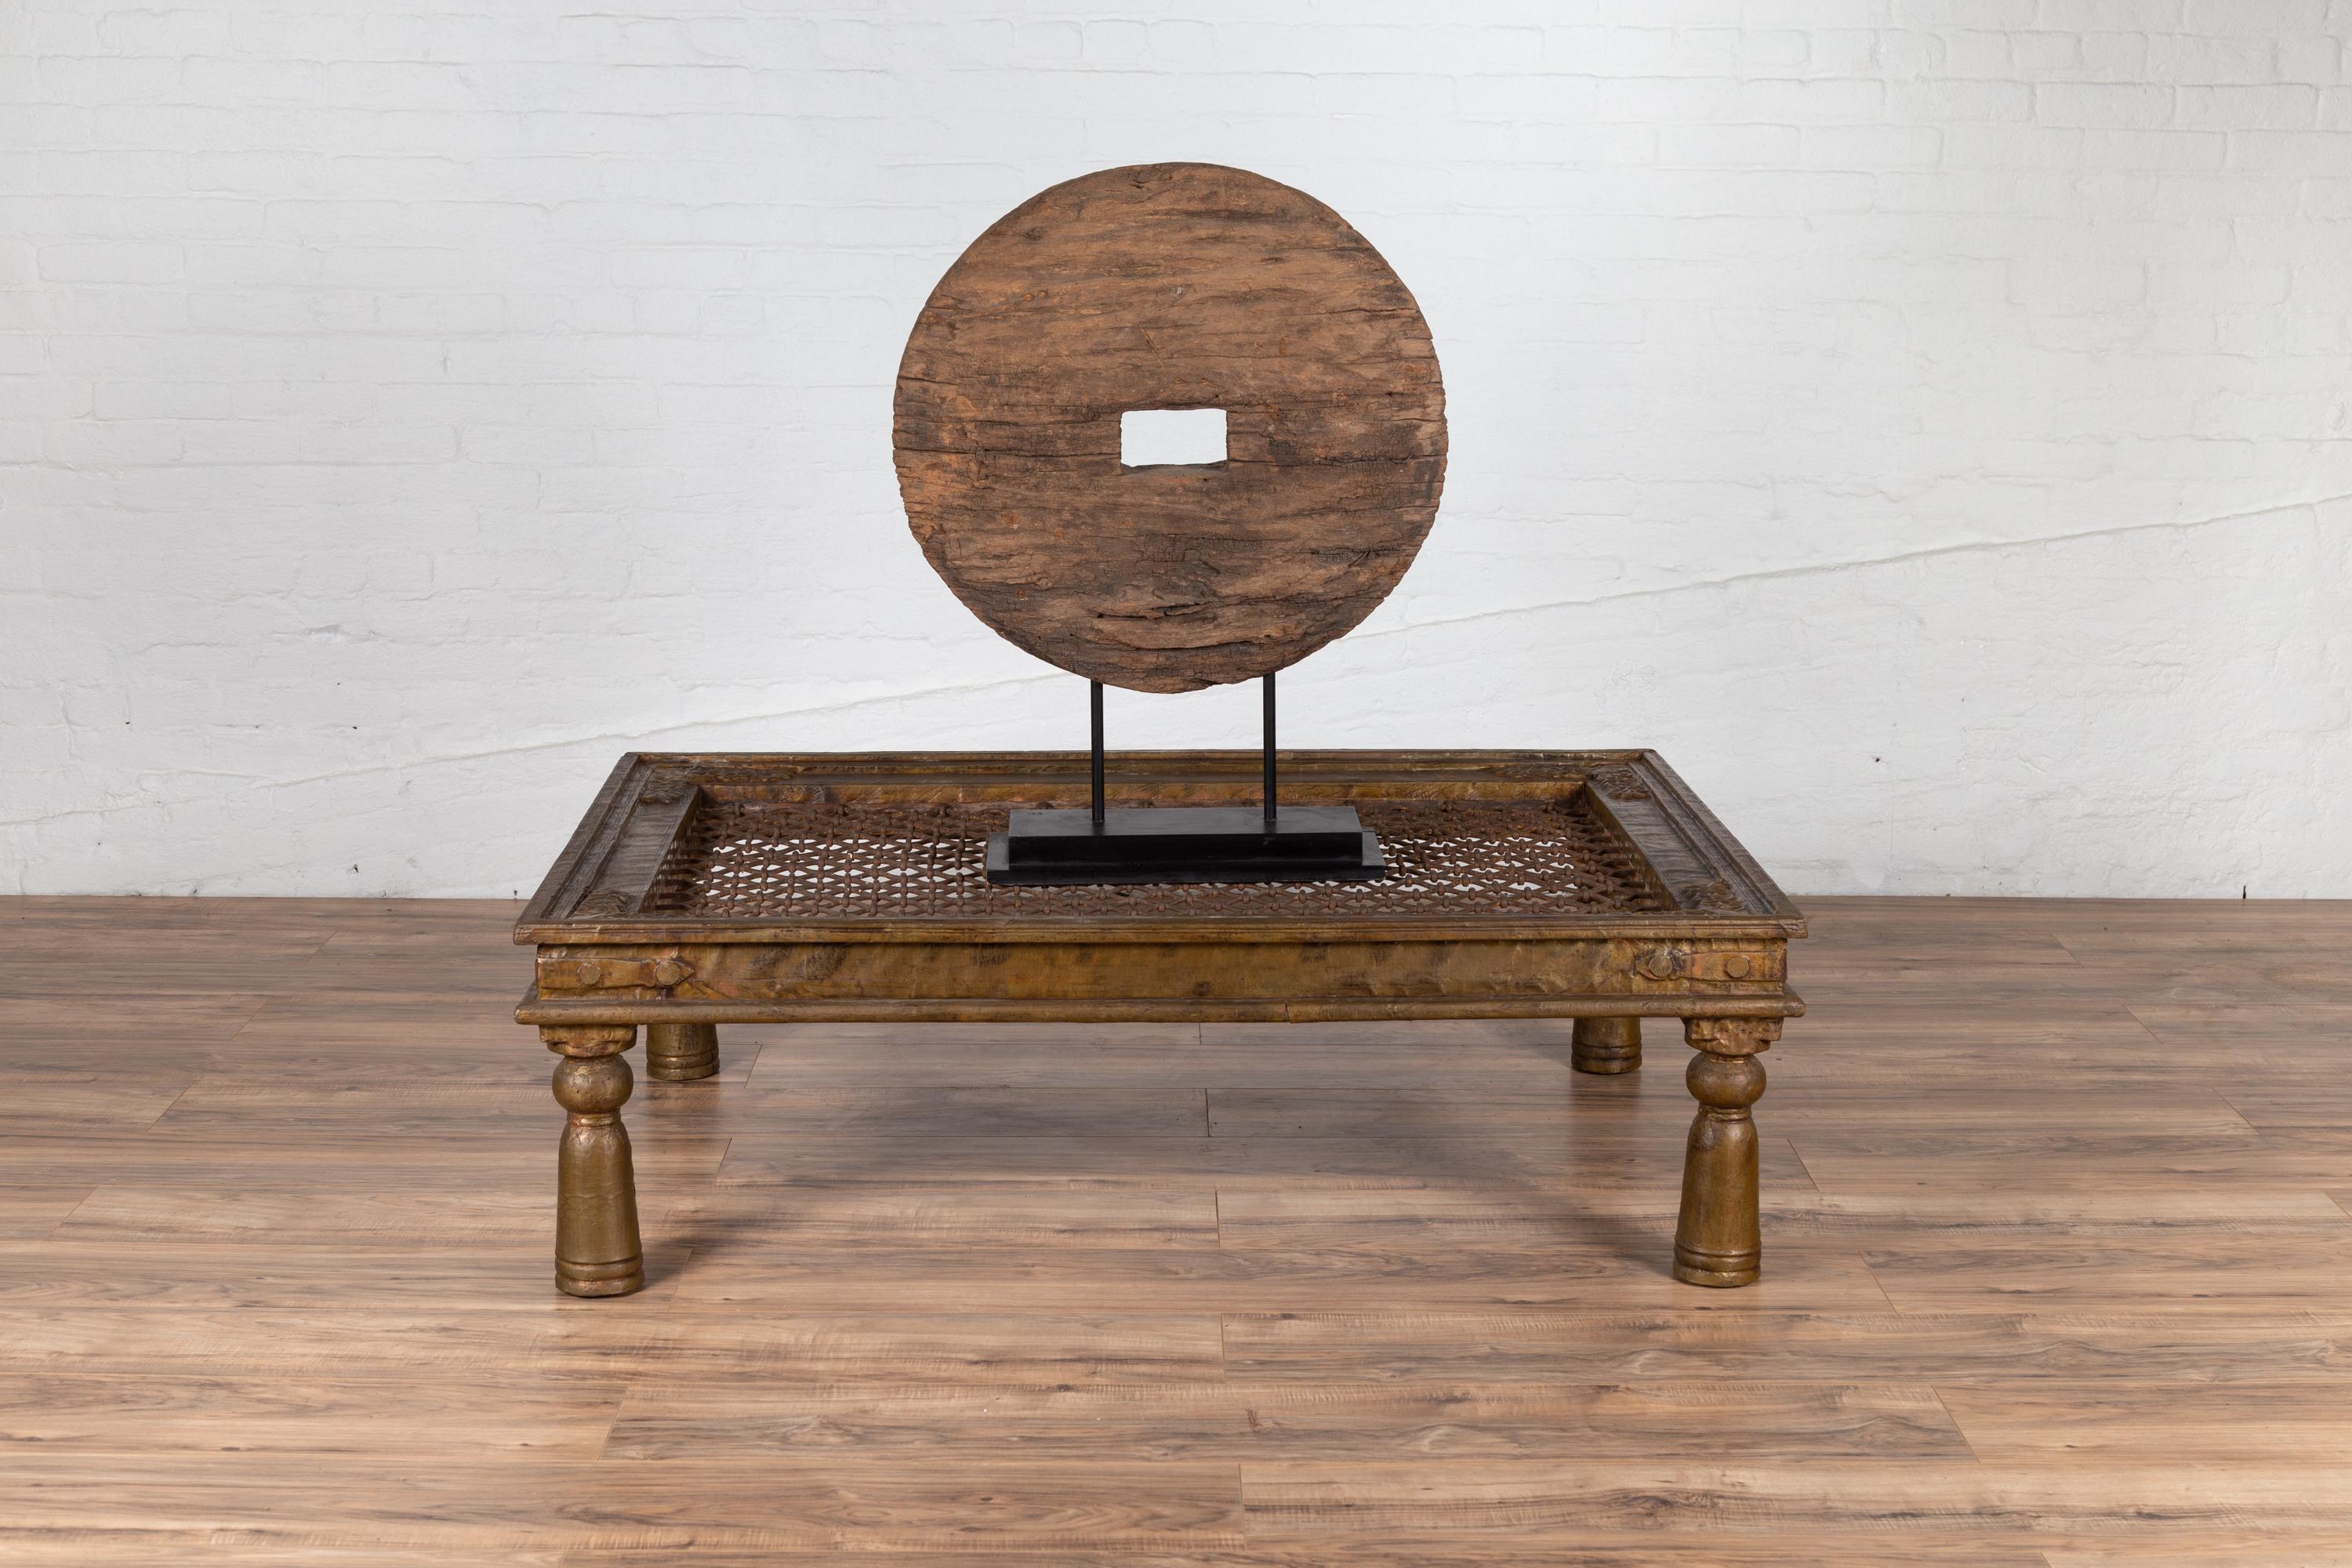 An Indian open iron design coffee table made of an antique window grate inset into a wooden structure accented with copper sheathing. Born in India during the early years of the 20th century, this Indian window grate is resting on four turned